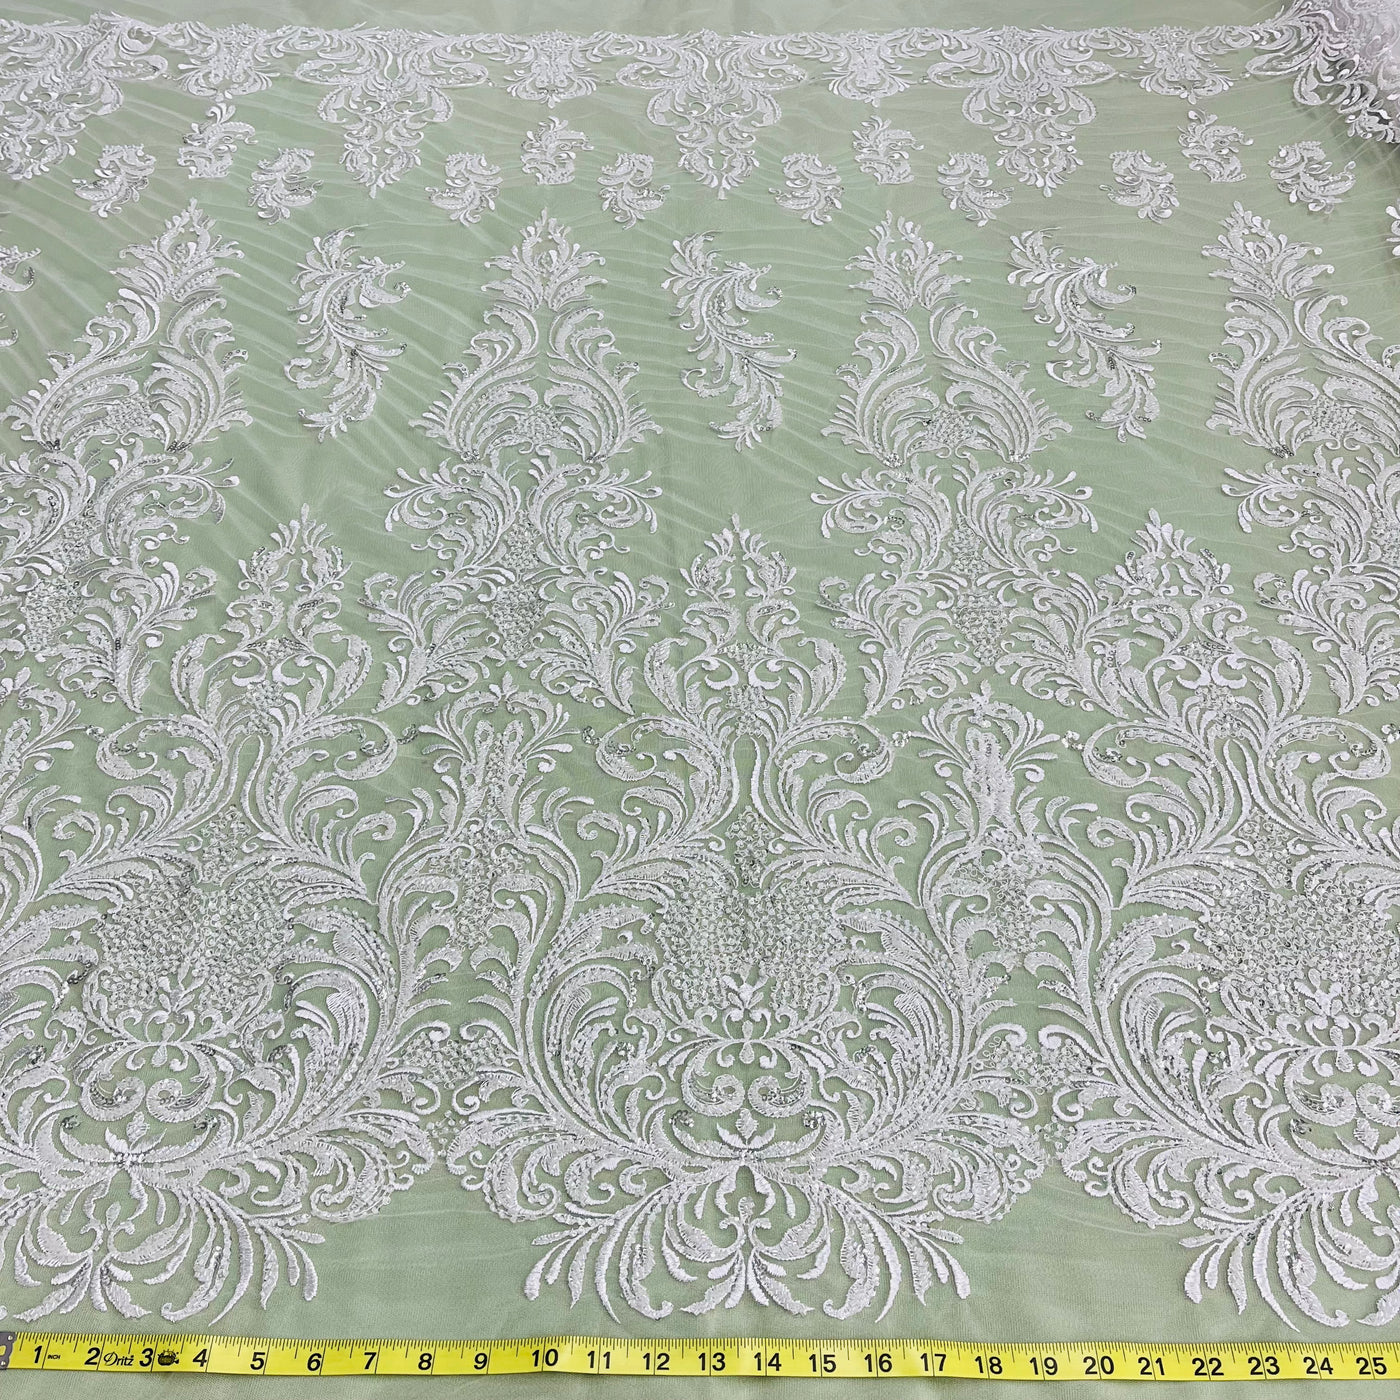 Beaded Lace Fabric Embroidered on 100% Polyester Net Mesh | Lace USA-GD-13267